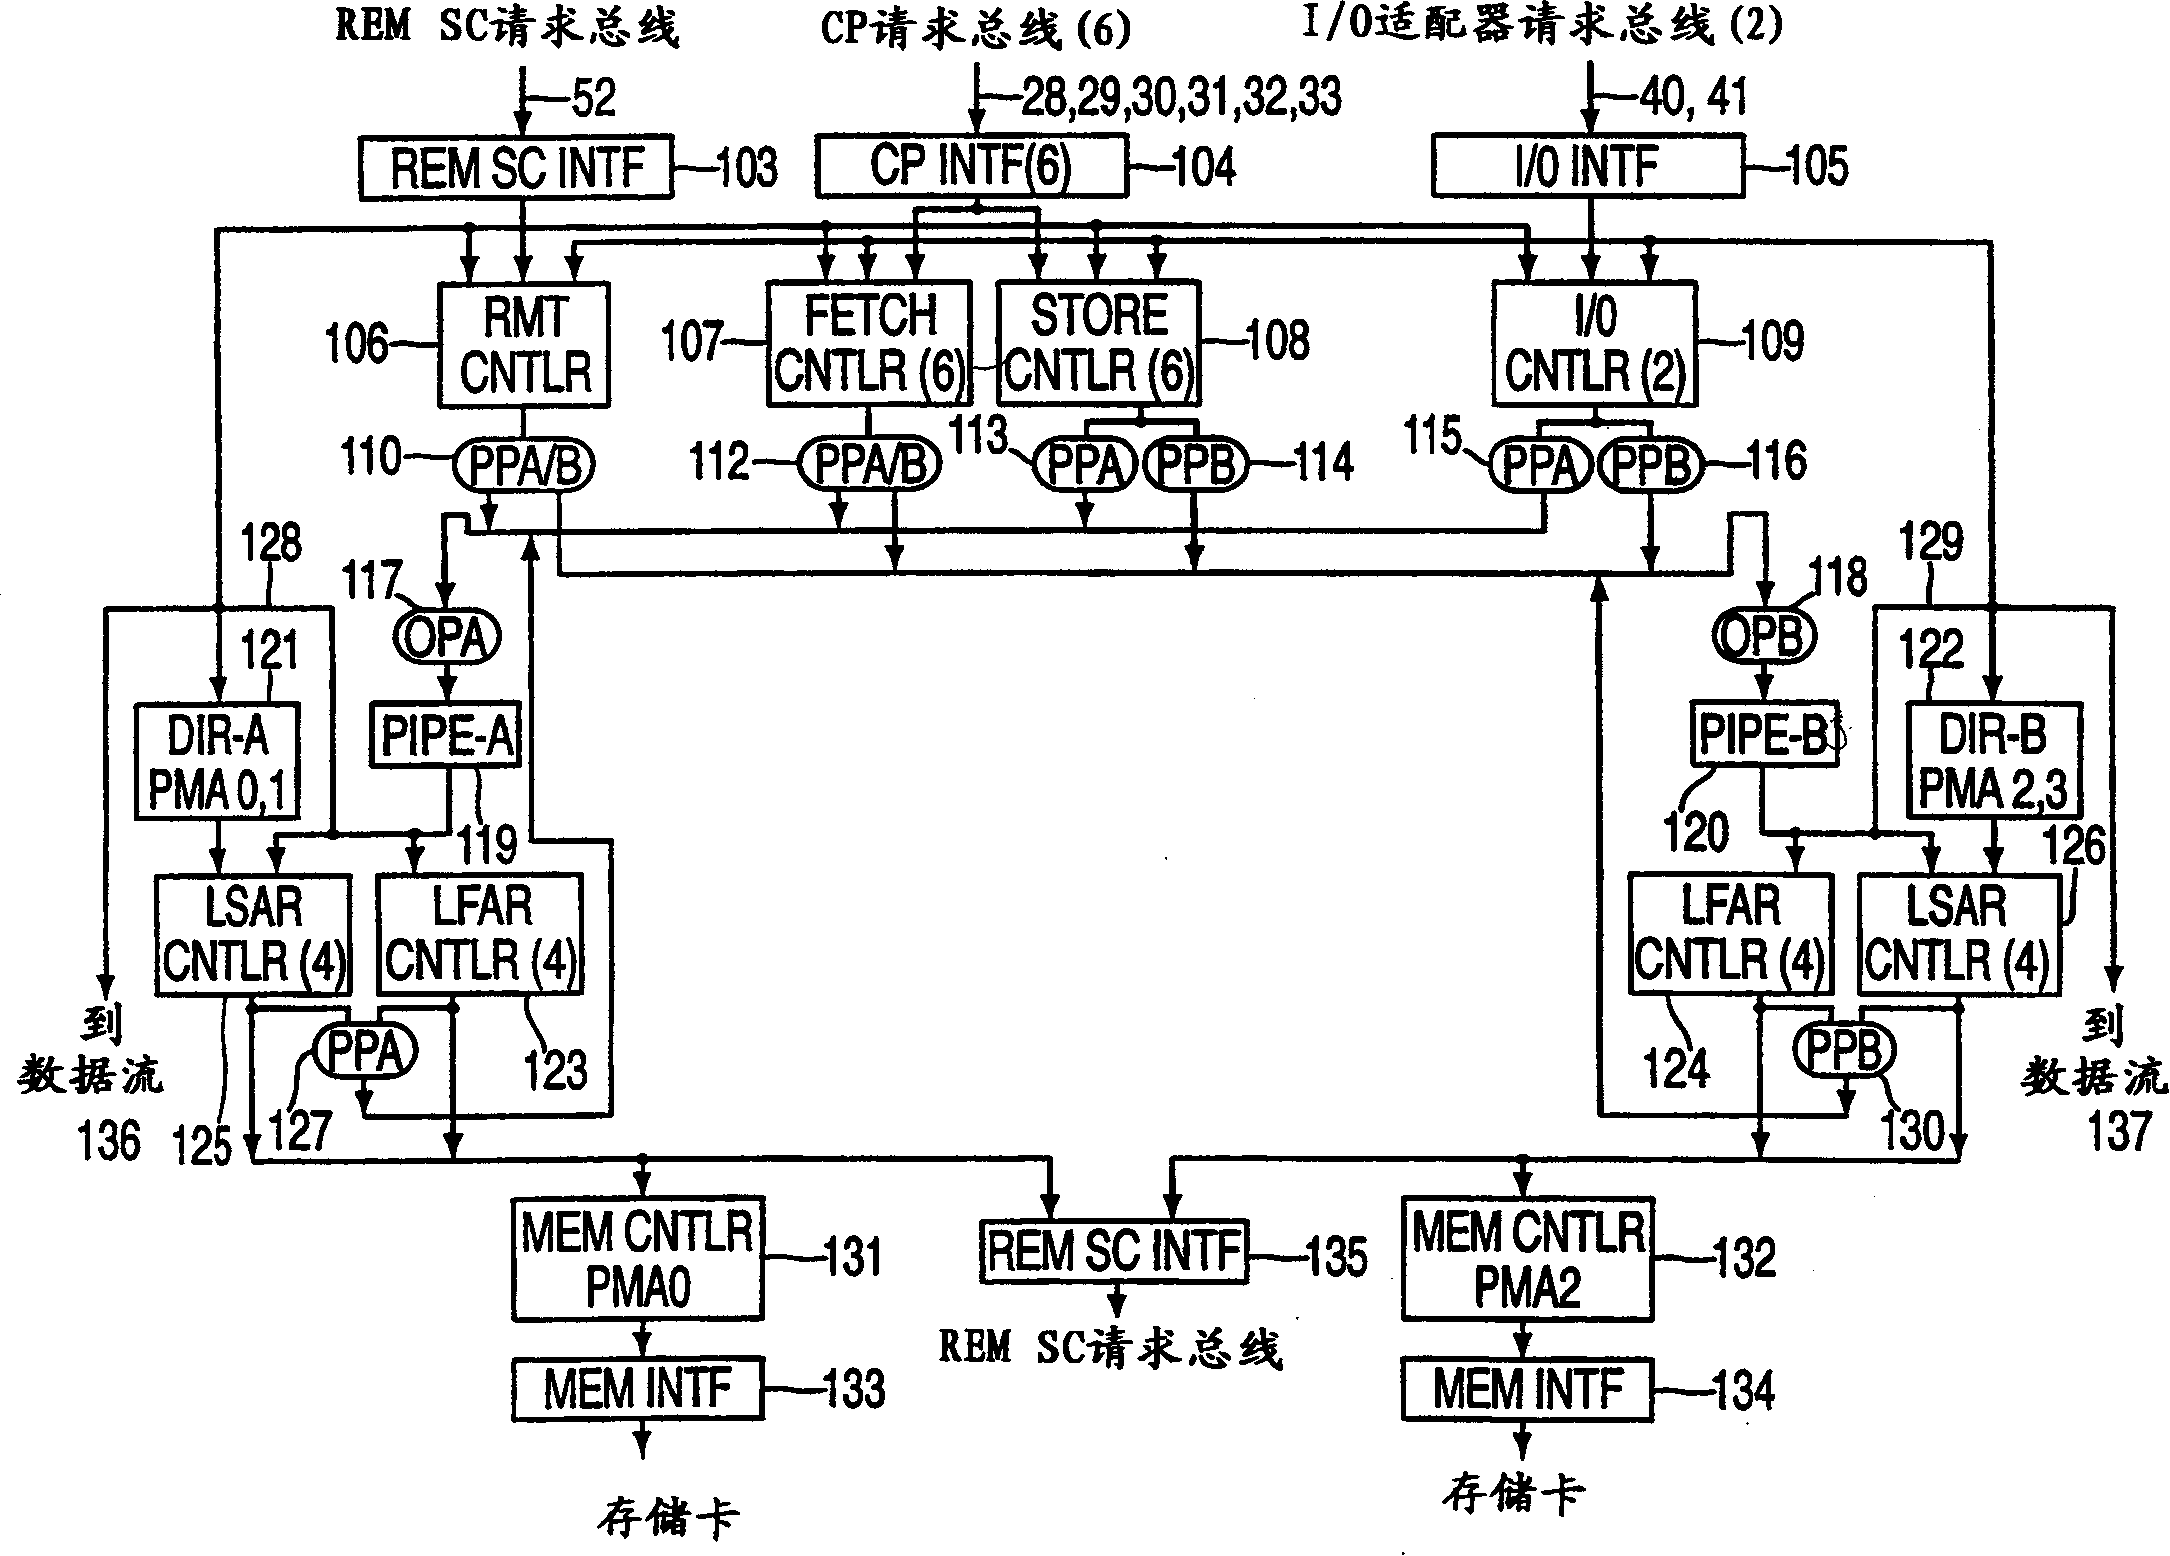 Dynamic serializing of memory access in multiprocessor system